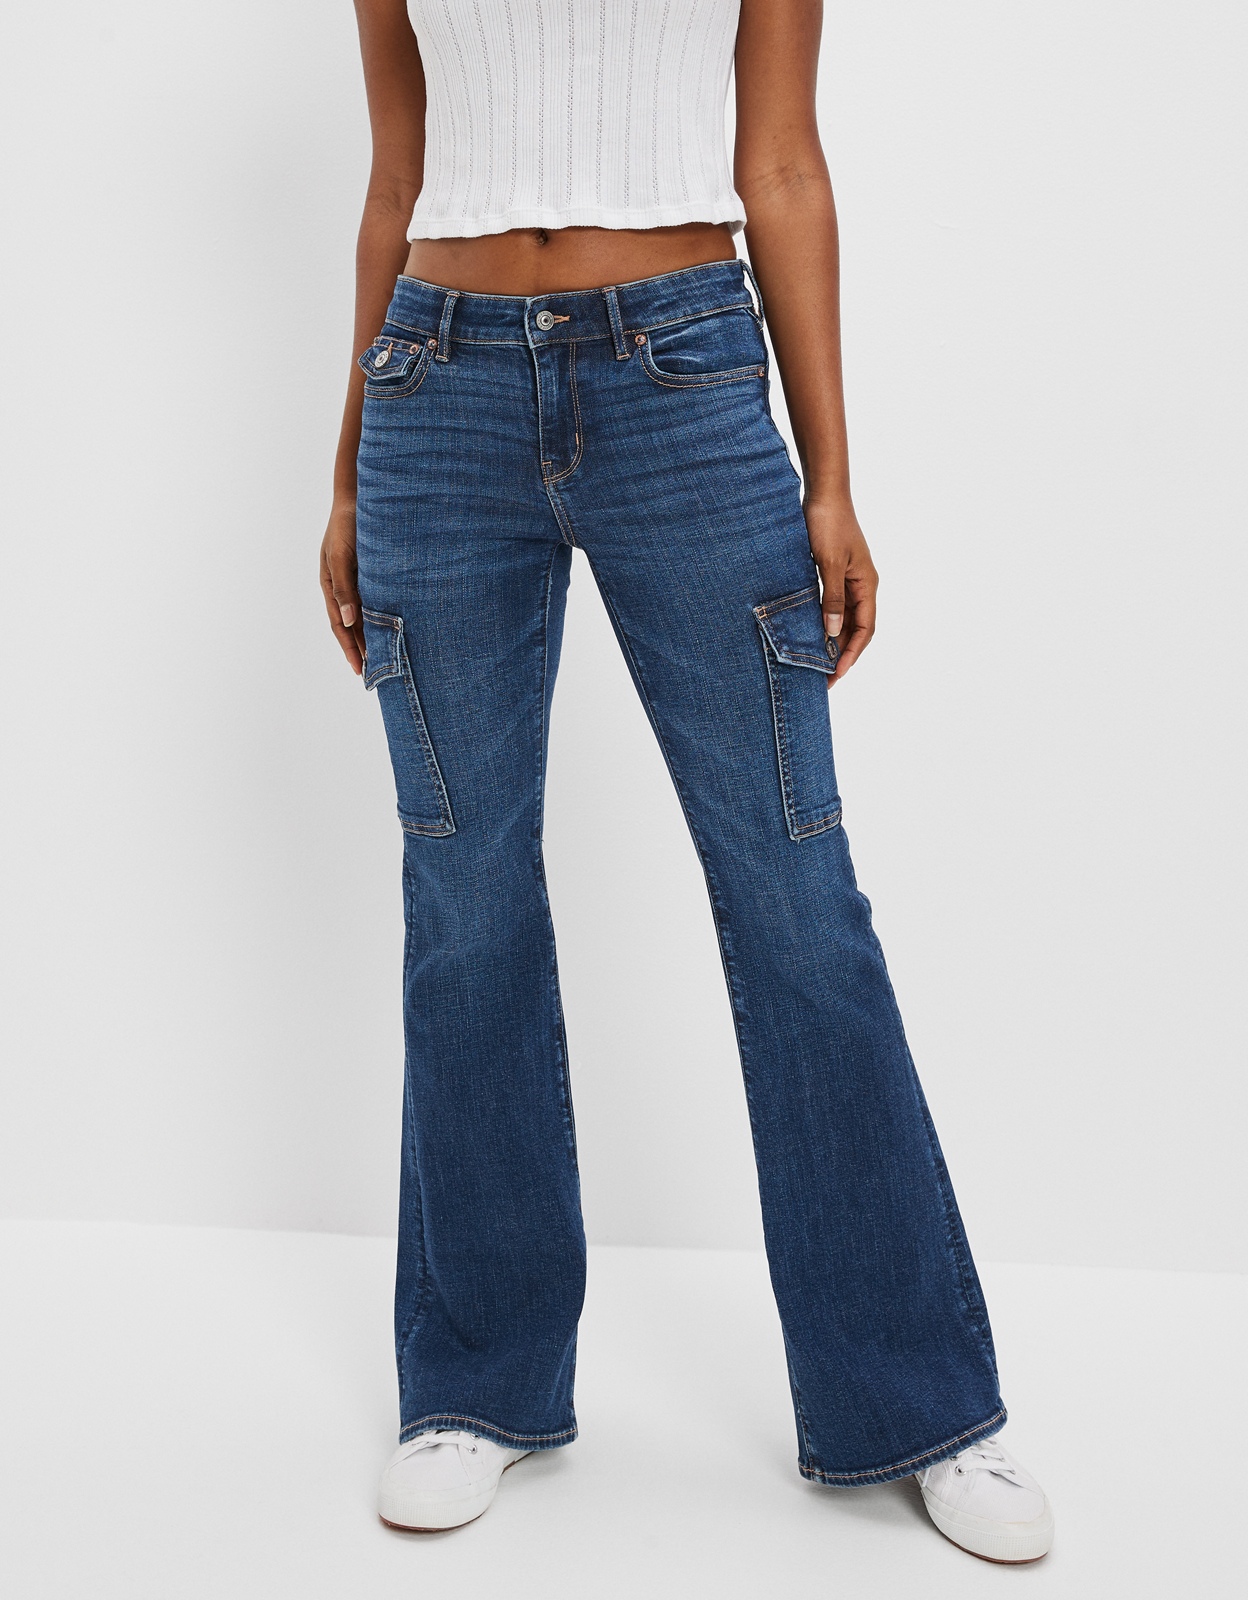 Shop AE Stretch Low-Rise Flare Jean online